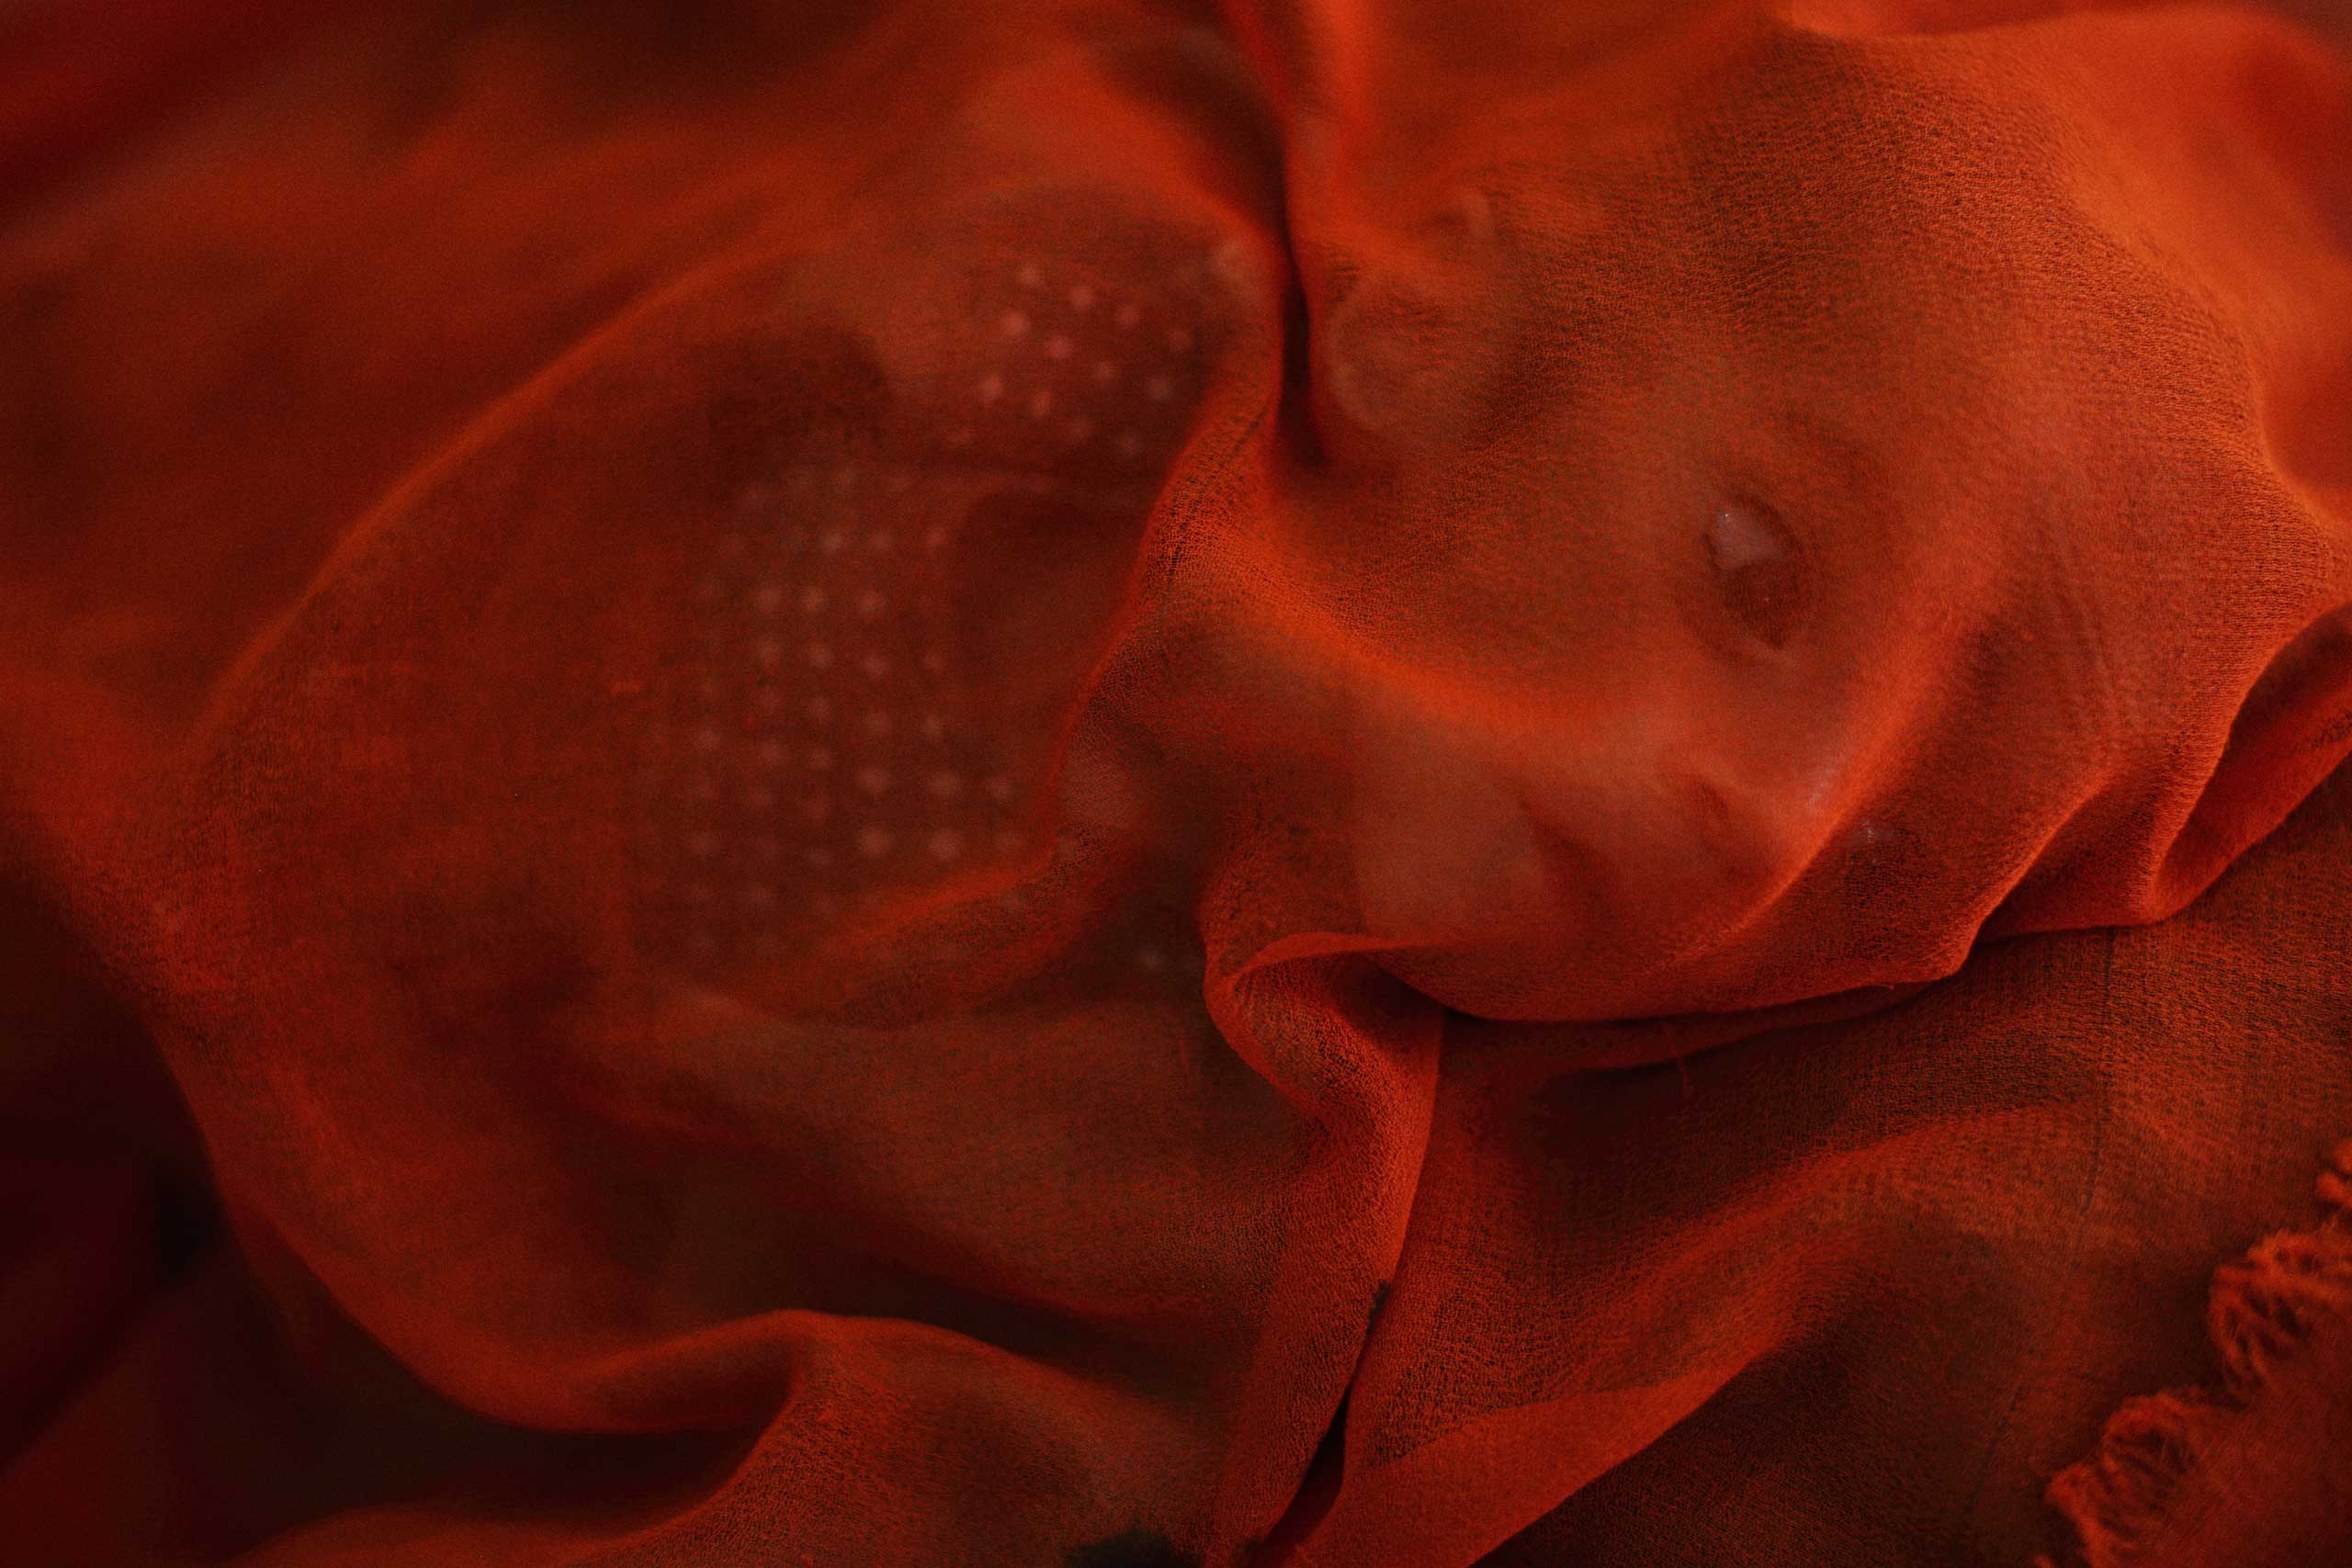 Gul Ahmad, an infant boy suffering from acute malnutrition, is covered by his mother's scarf while being treated in the therapeutic feeding center ward at the Doctors Without Borders (MSF) administered Boost Hospital in Lashkar Gah, Helmand province, Afghanistan on April 6, 2015. (Andrew Quilty—Oculi)